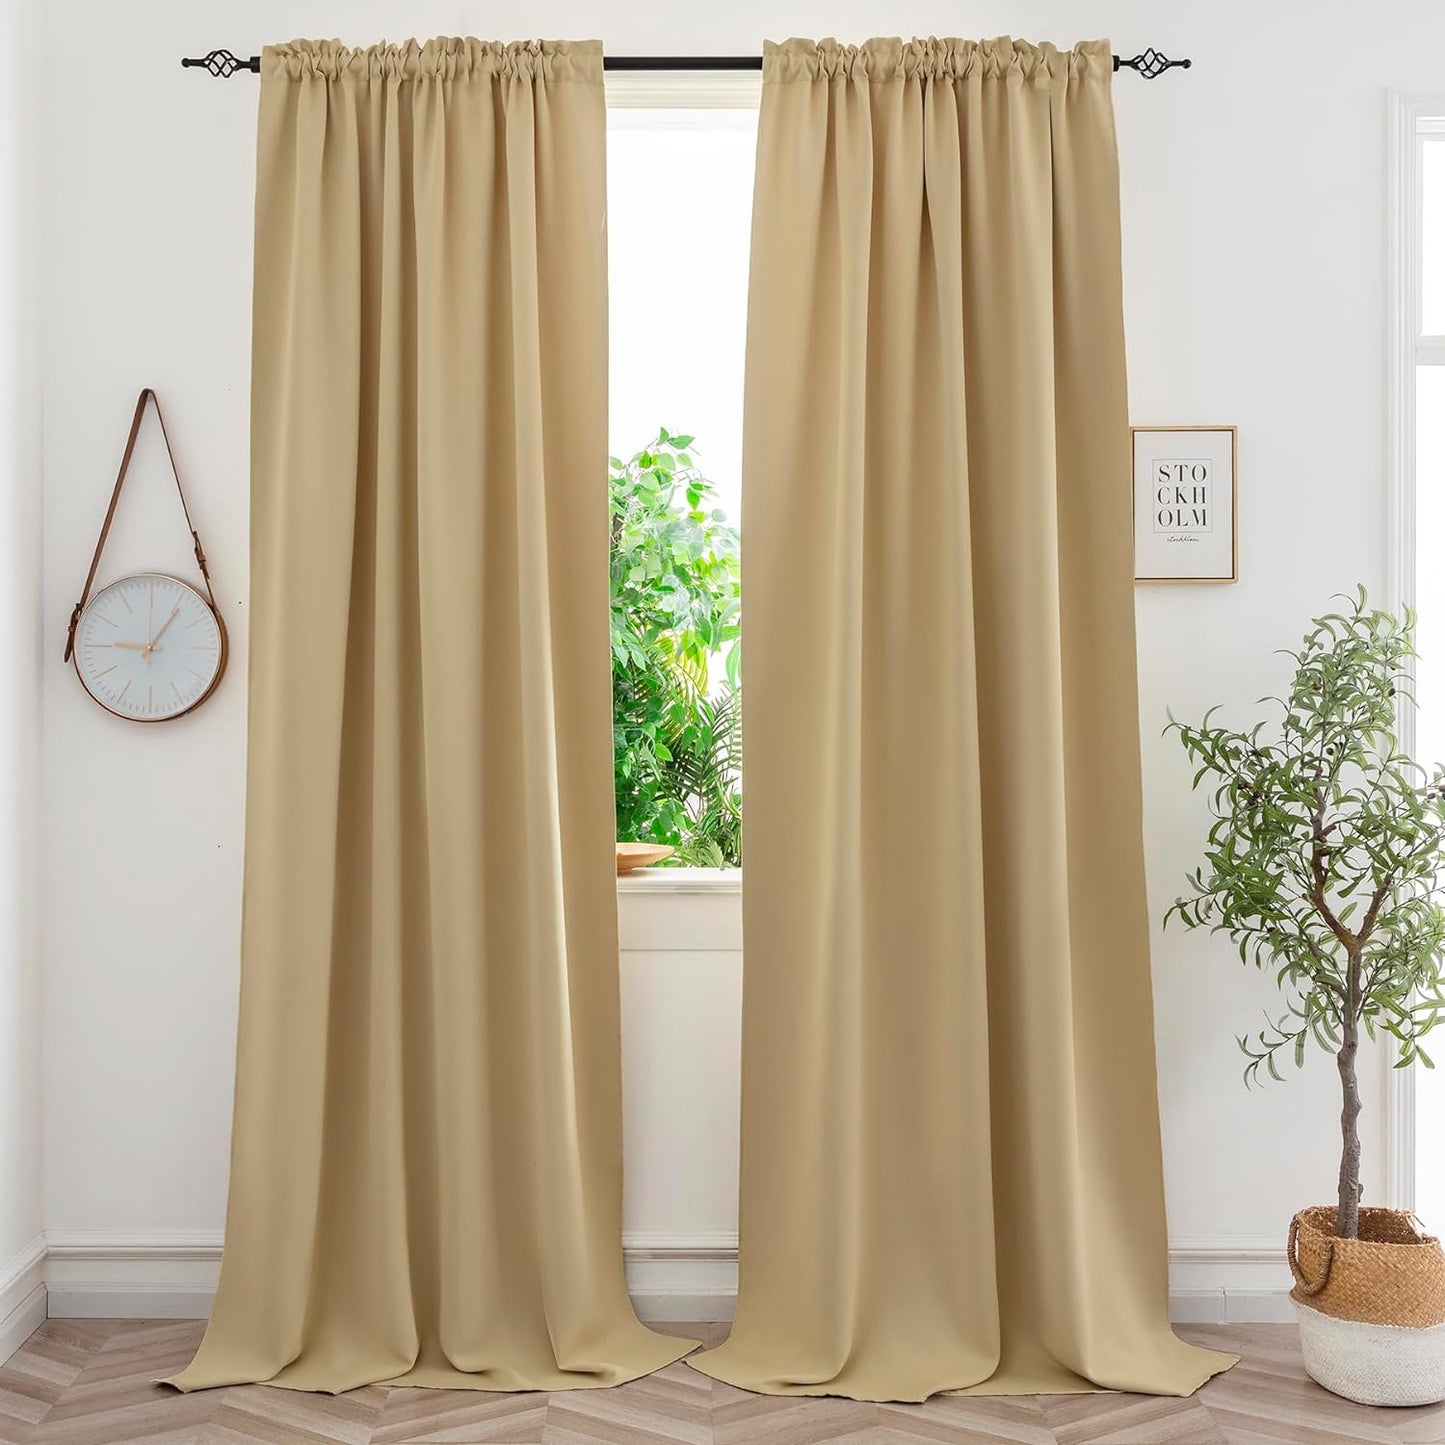 Yancorp Black Blackout Curtain Thermal Insulated Window Treatment 63 Inches Long for Bedroom or Living Room (Single Panel), 34 in X 63 In, Black  Yancorp Beige 34''W X 84''L｜2 Pc 